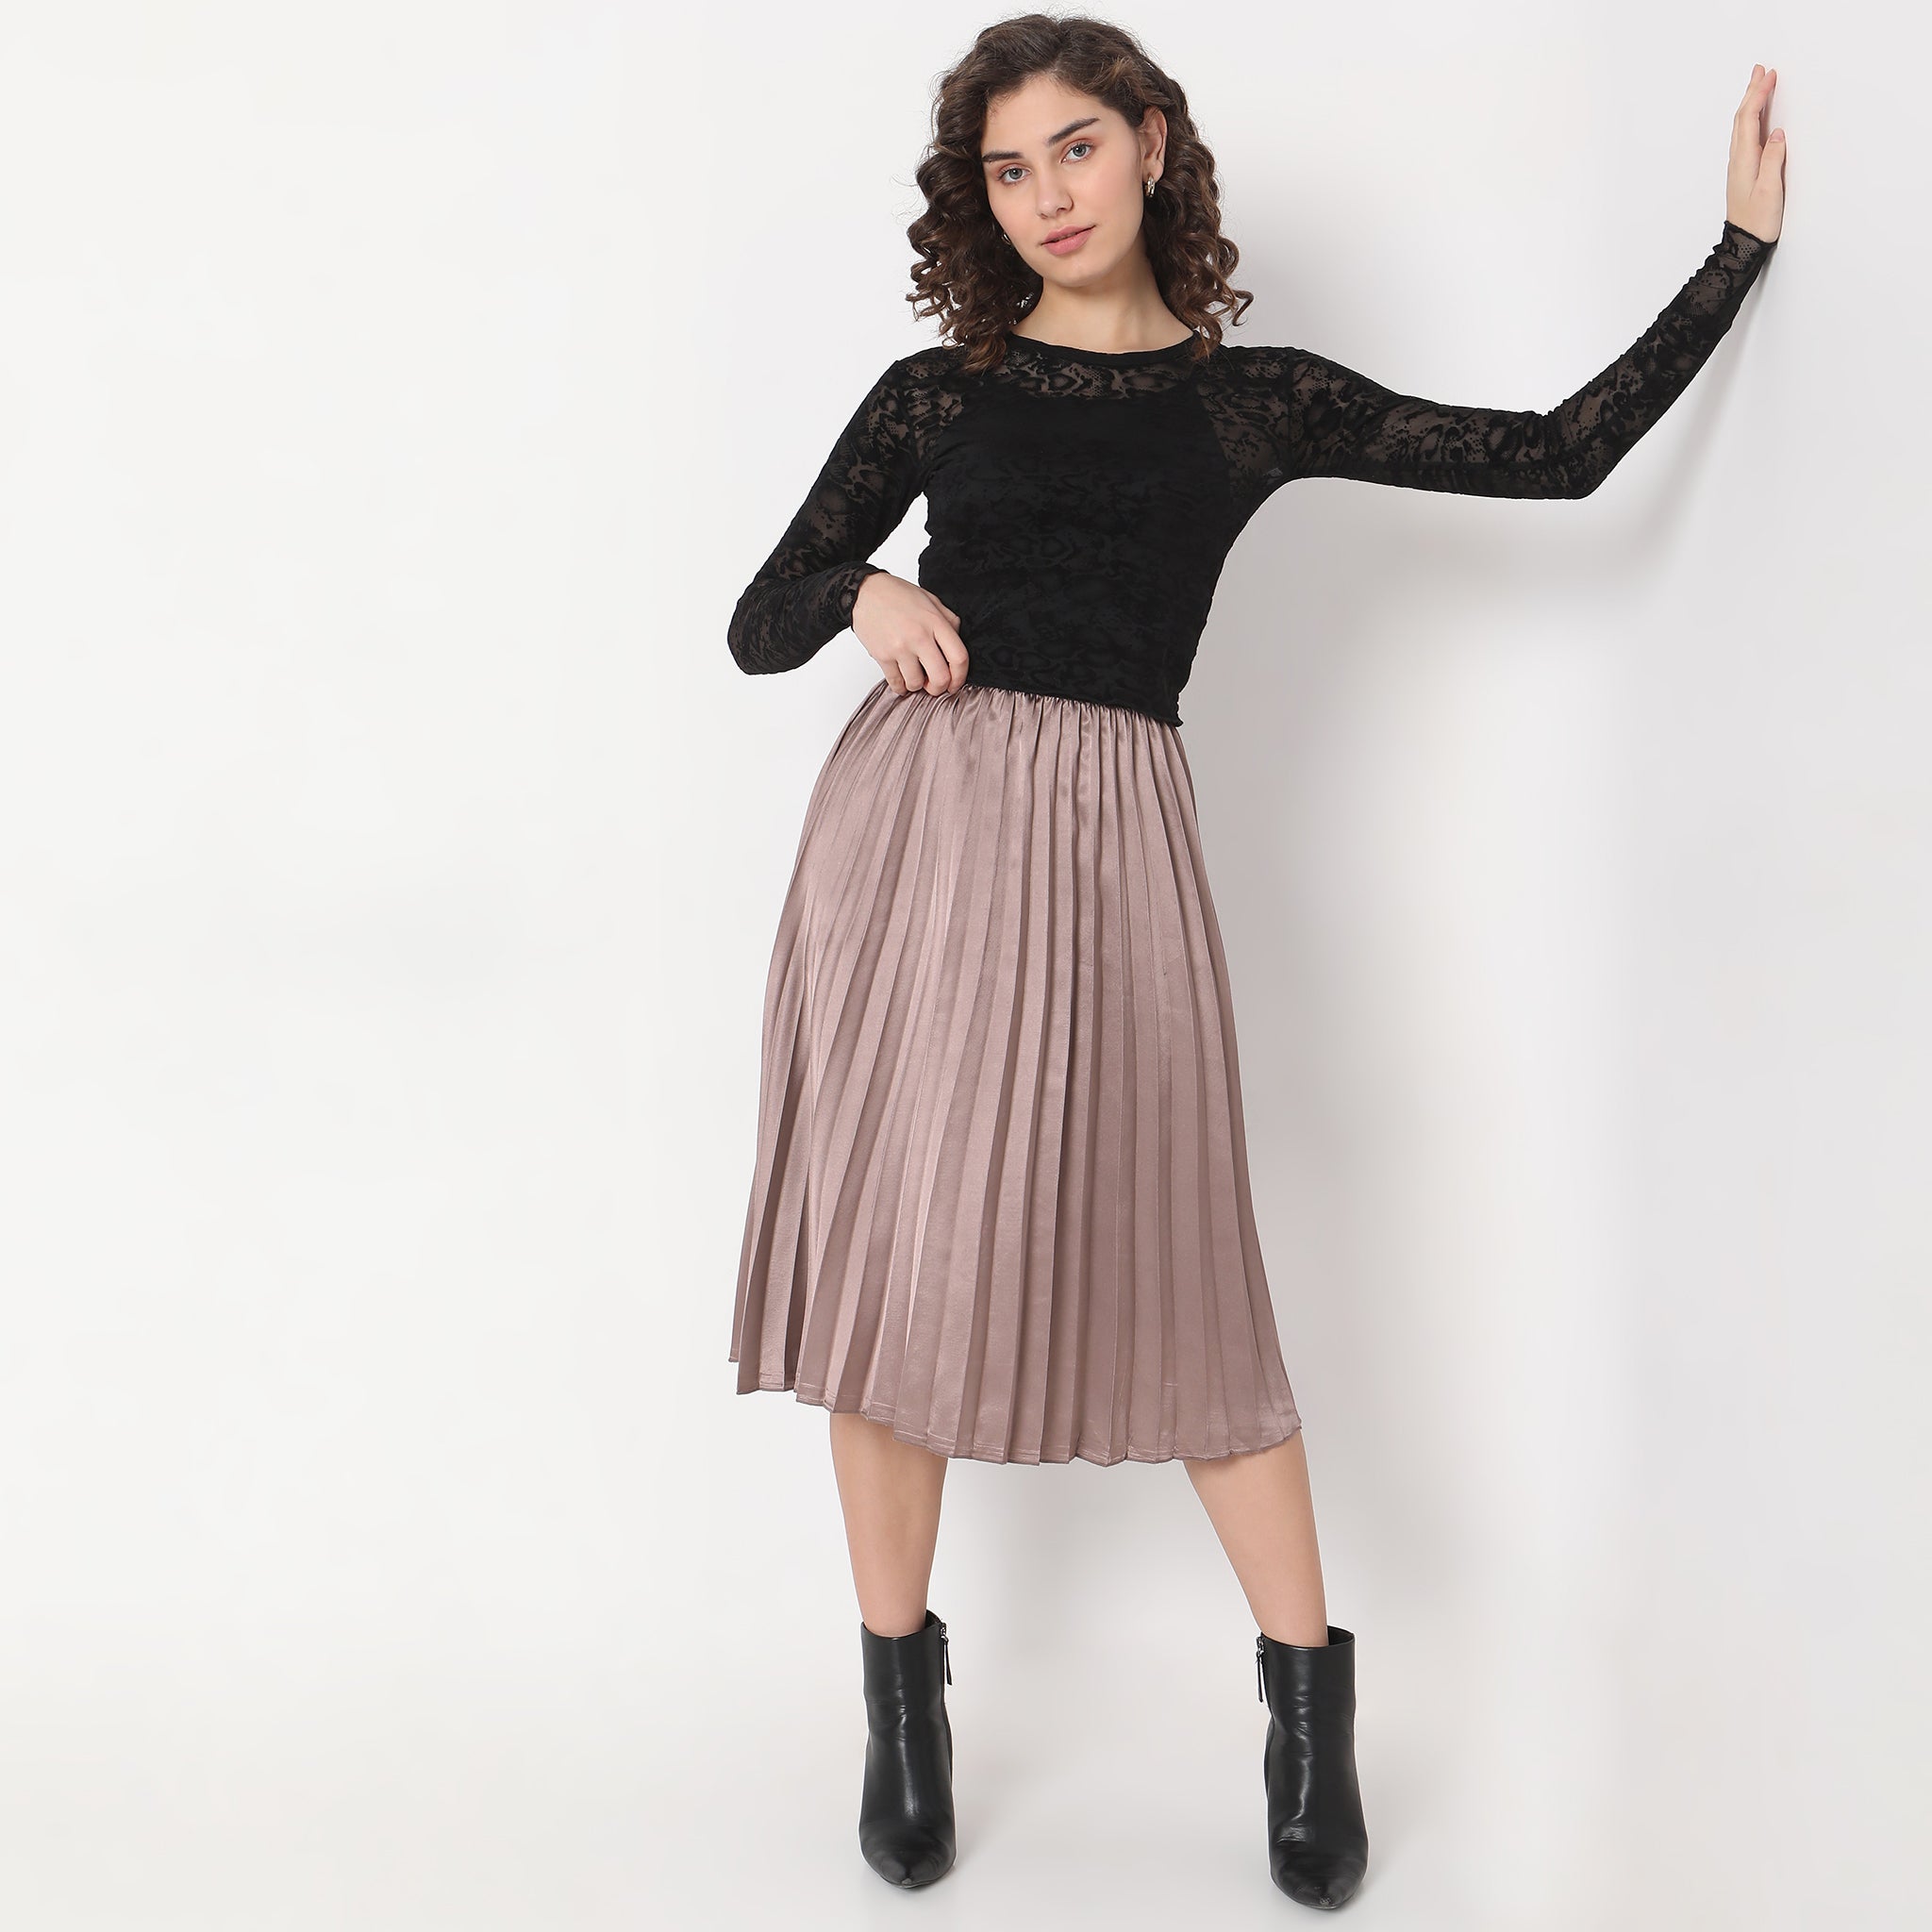 Flare Fit Solid Mid Rise Skirts